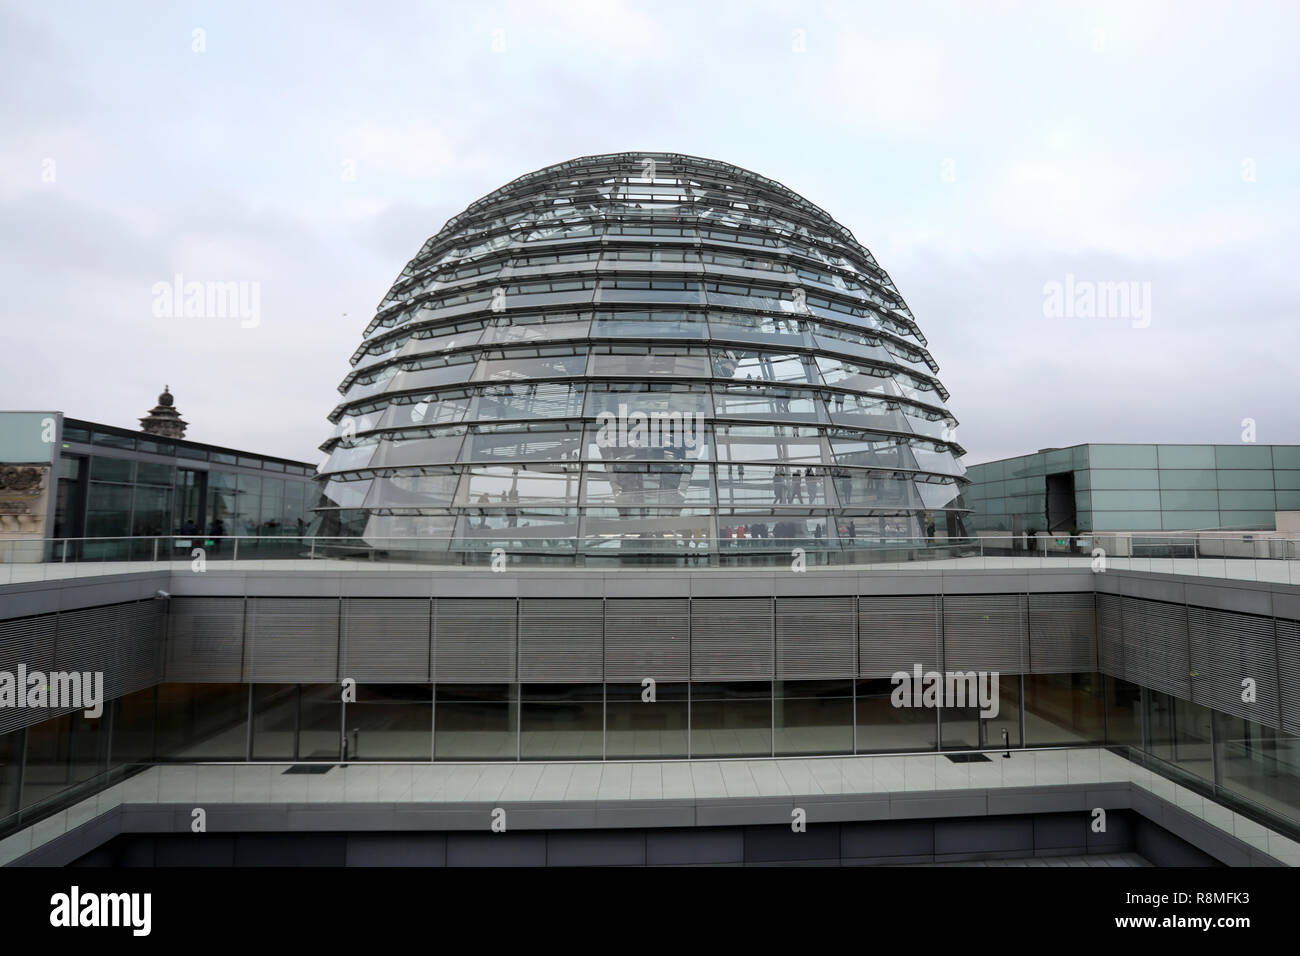 Berlin / Germany - December 15 2018: The glass dome on top of the Reichstag Building, the German parliament, in central Berlin. Stock Photo